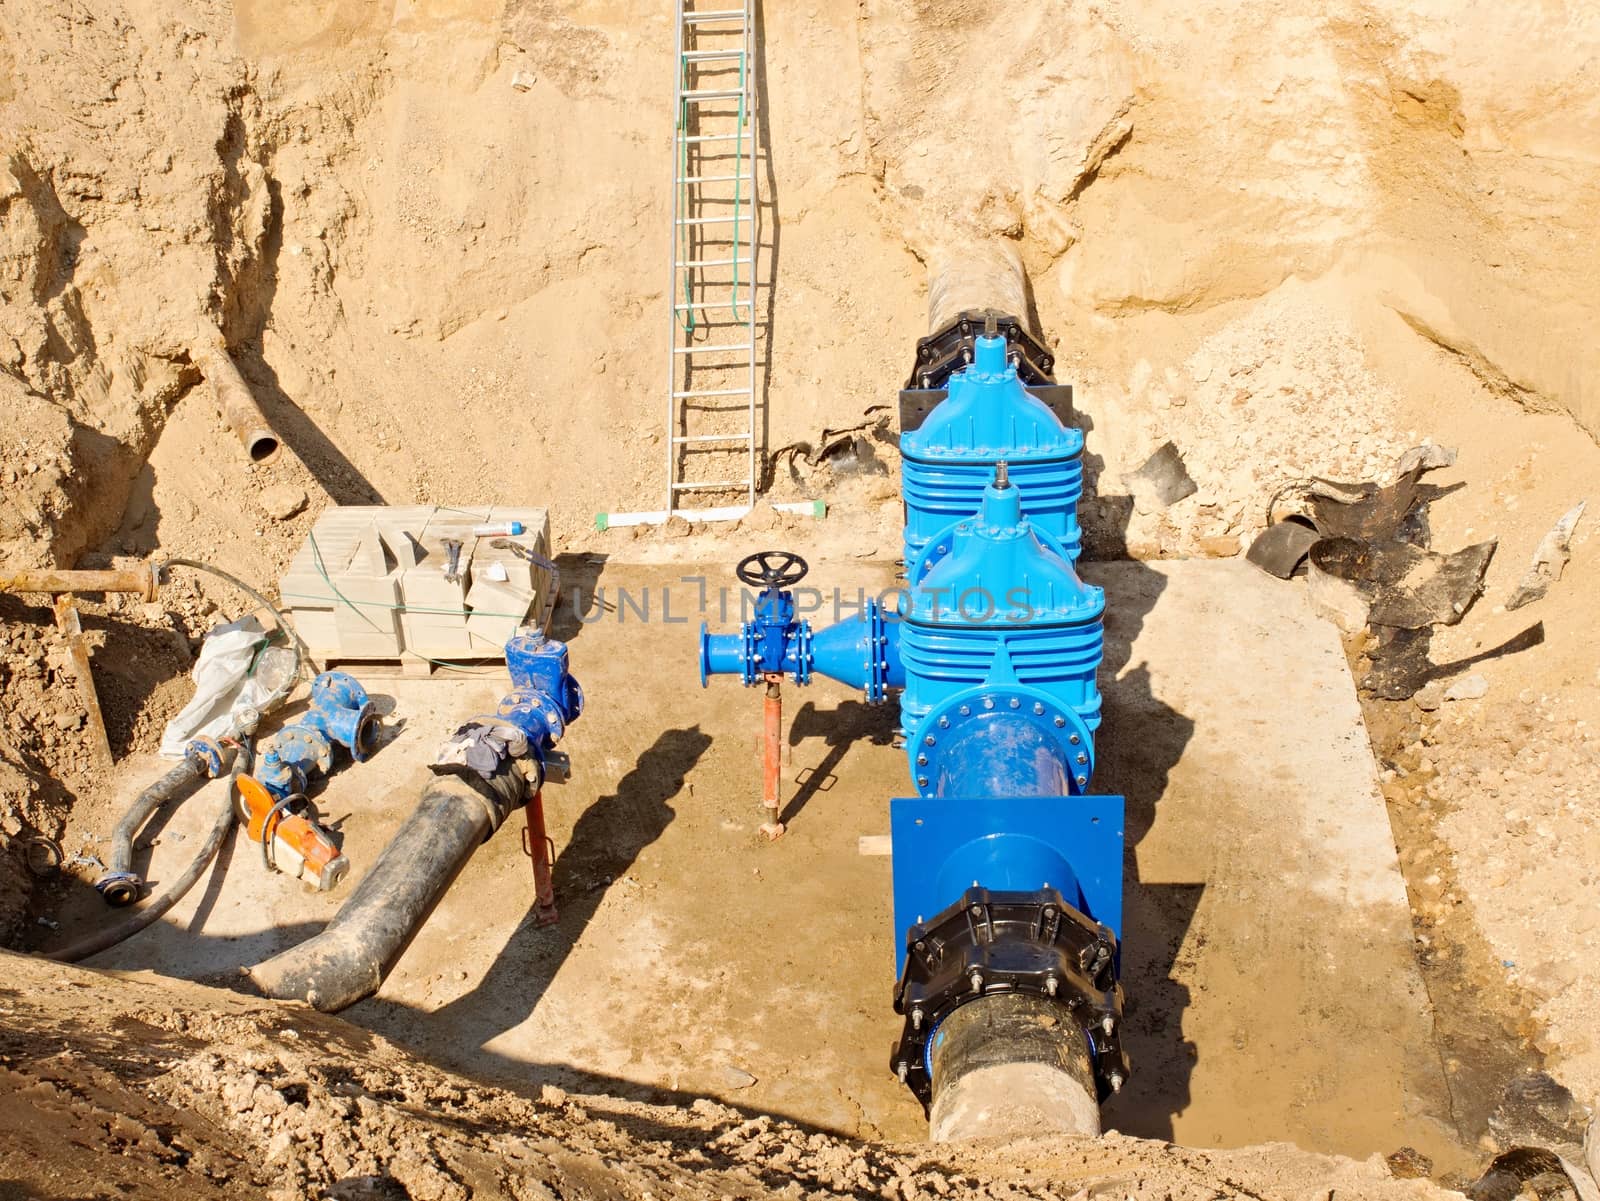 500 mm drink water Gate valve joint with screwed pipe fitting - repairing of main water pipeline underground 